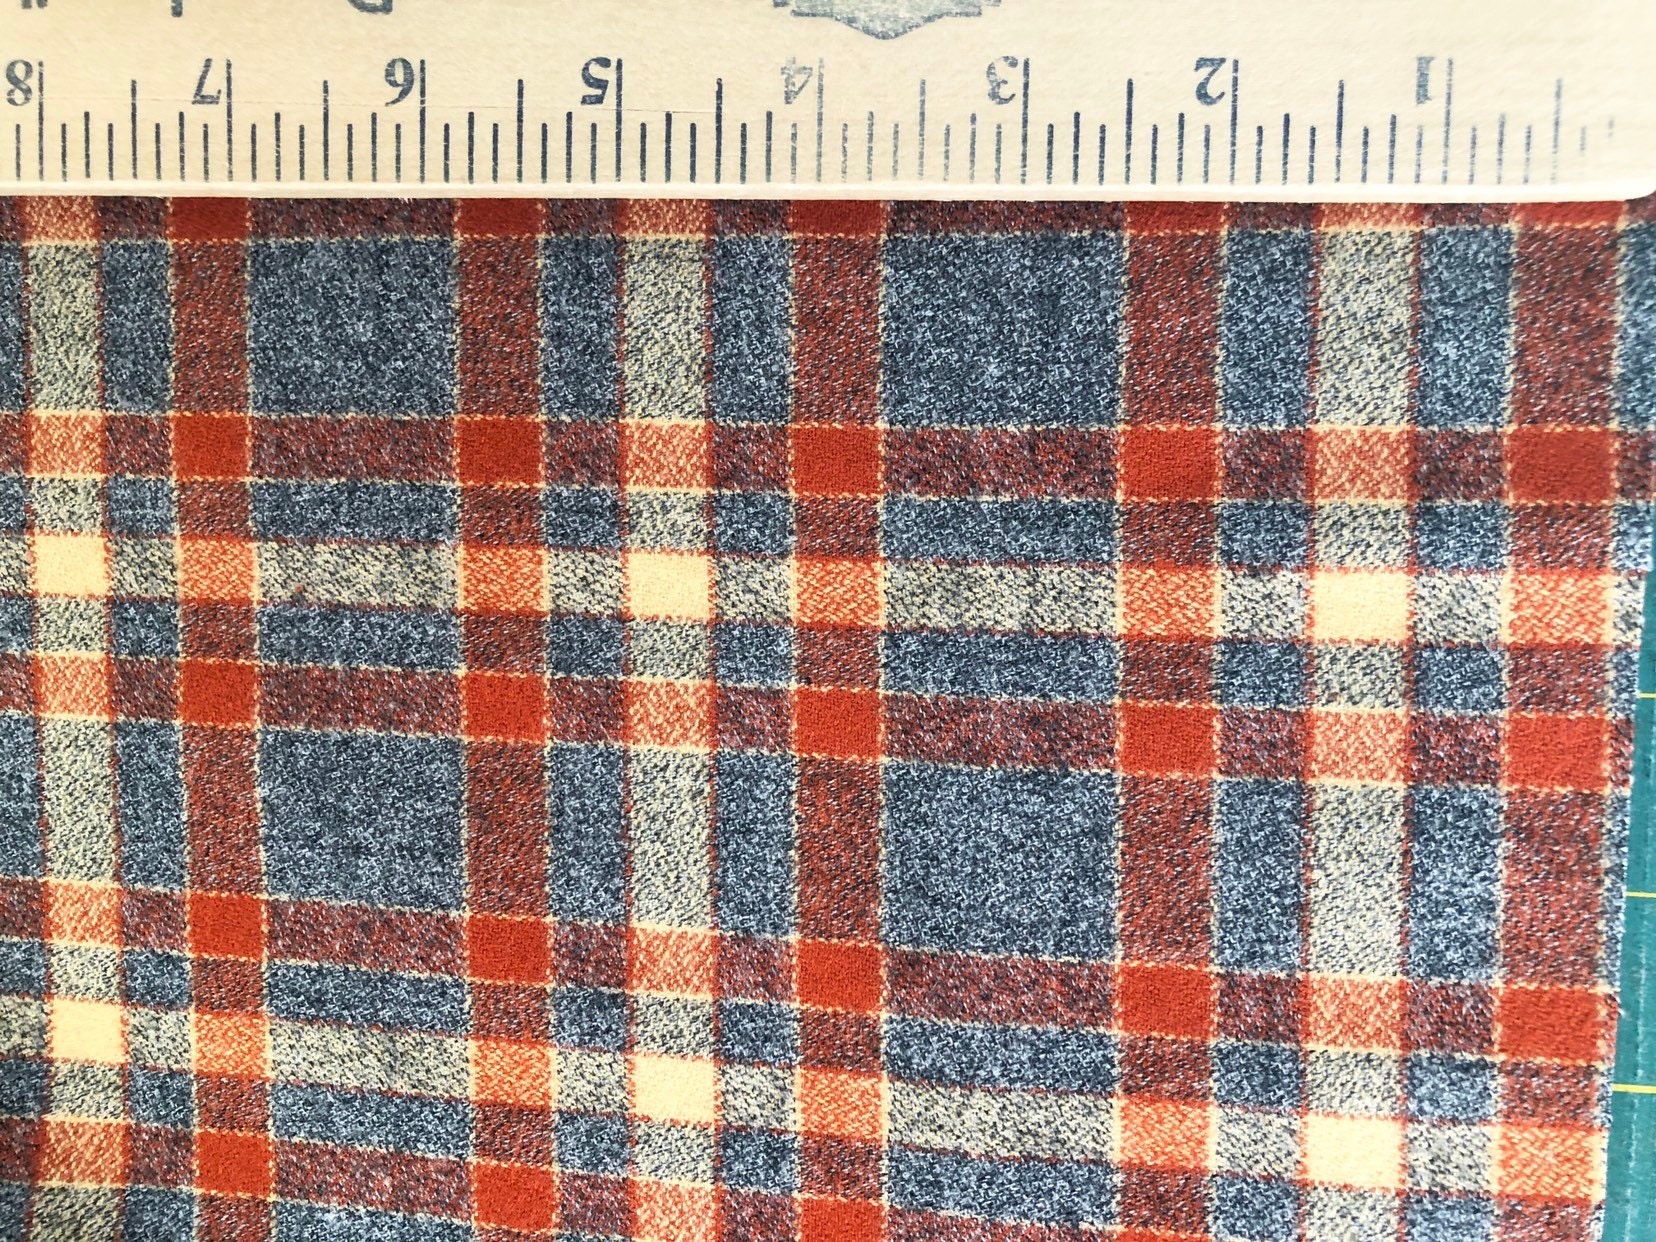 Louis Vuitton Plaid Flannel Fabric Brown - Fabrics From Turkey